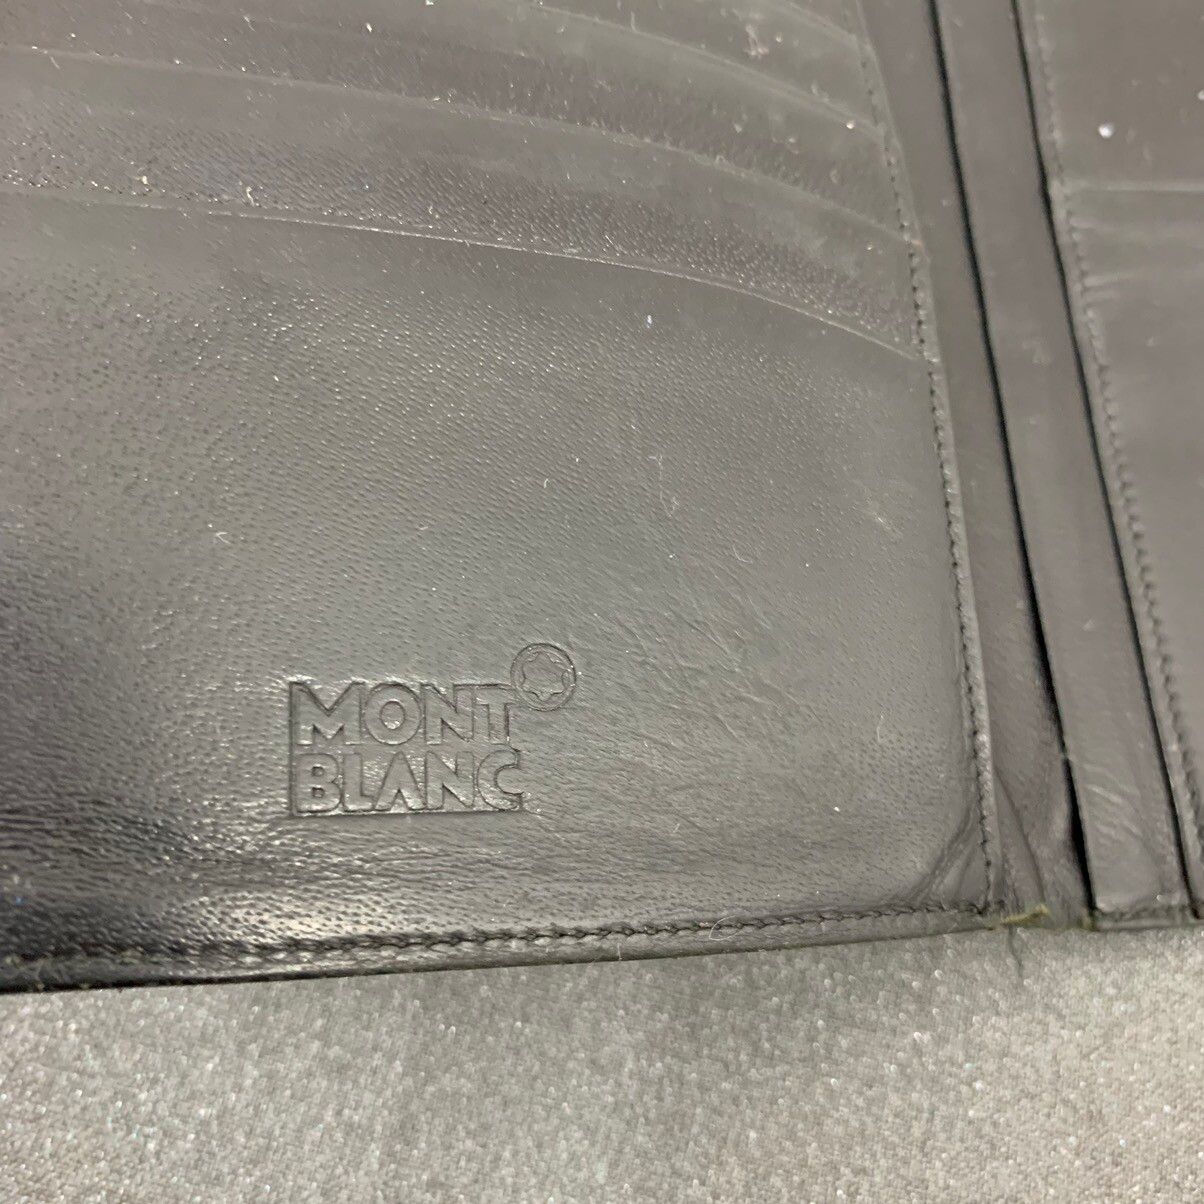 Leather - Montblanc Bussiness Card Holder Wallet - 4